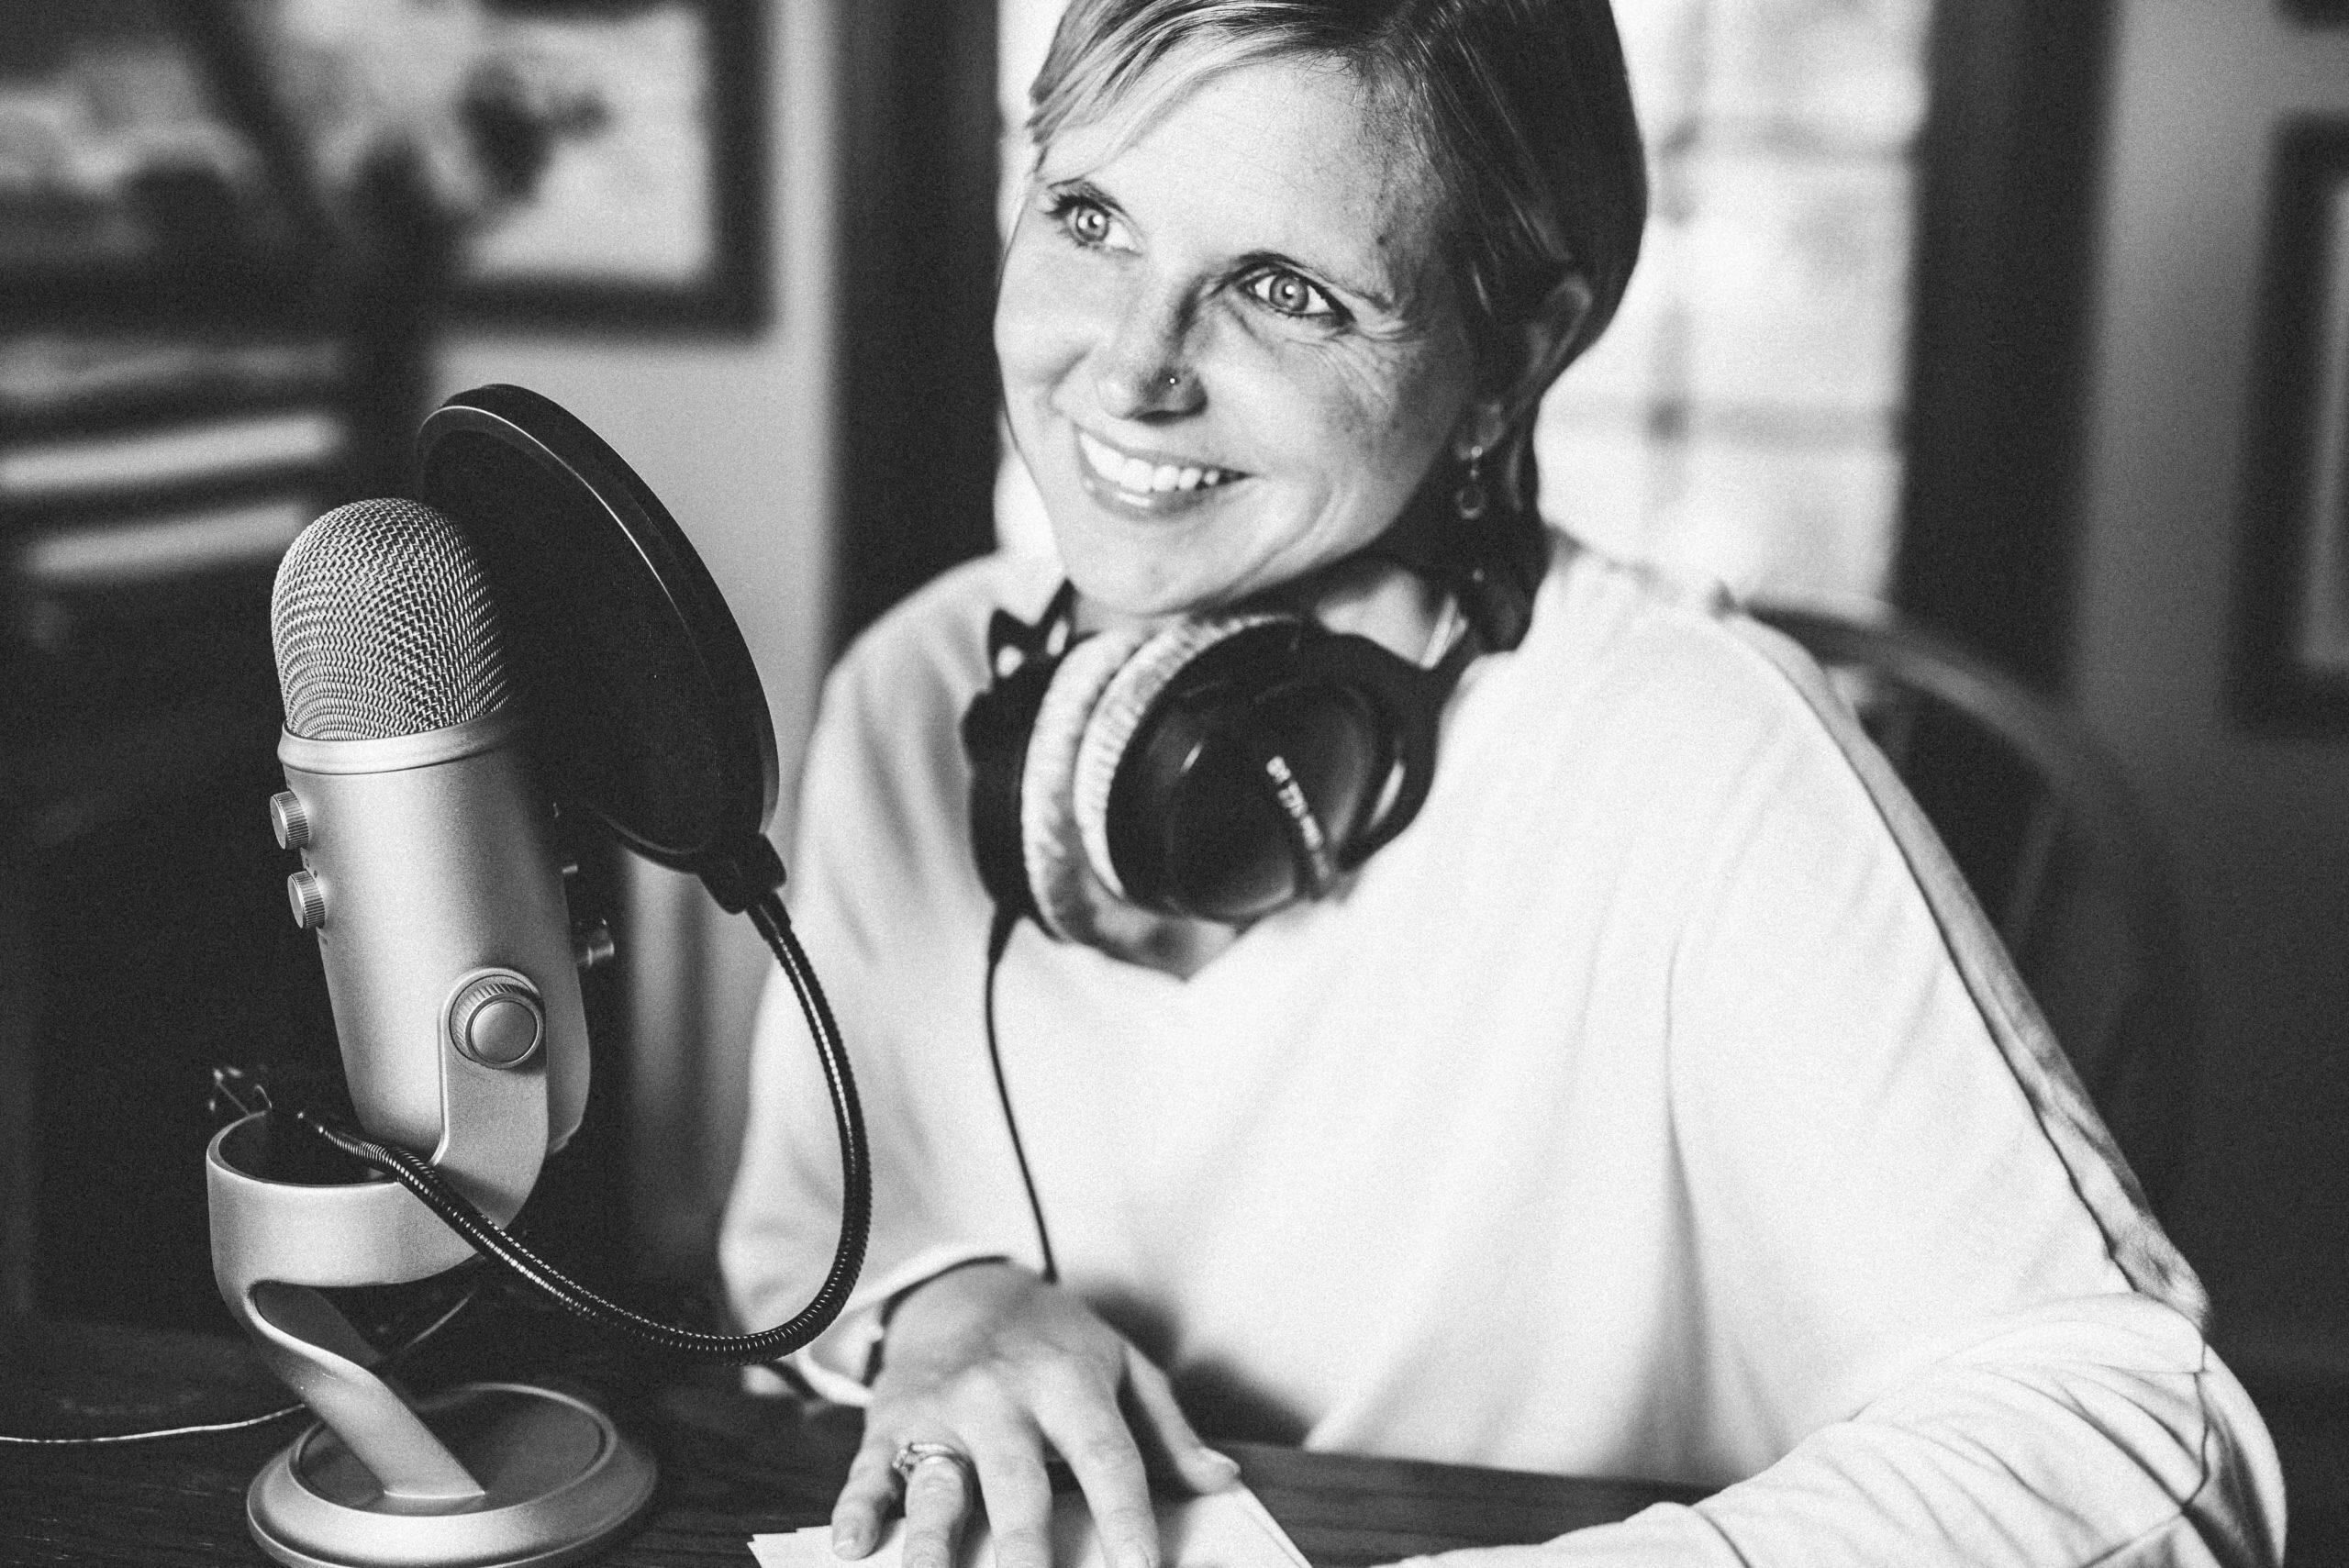 A black and white image of a white 40-something year old woman with short hair looking off into the distance. She has recording studio headphones around her neck and is sitting in front of a microphone with a pop filter.